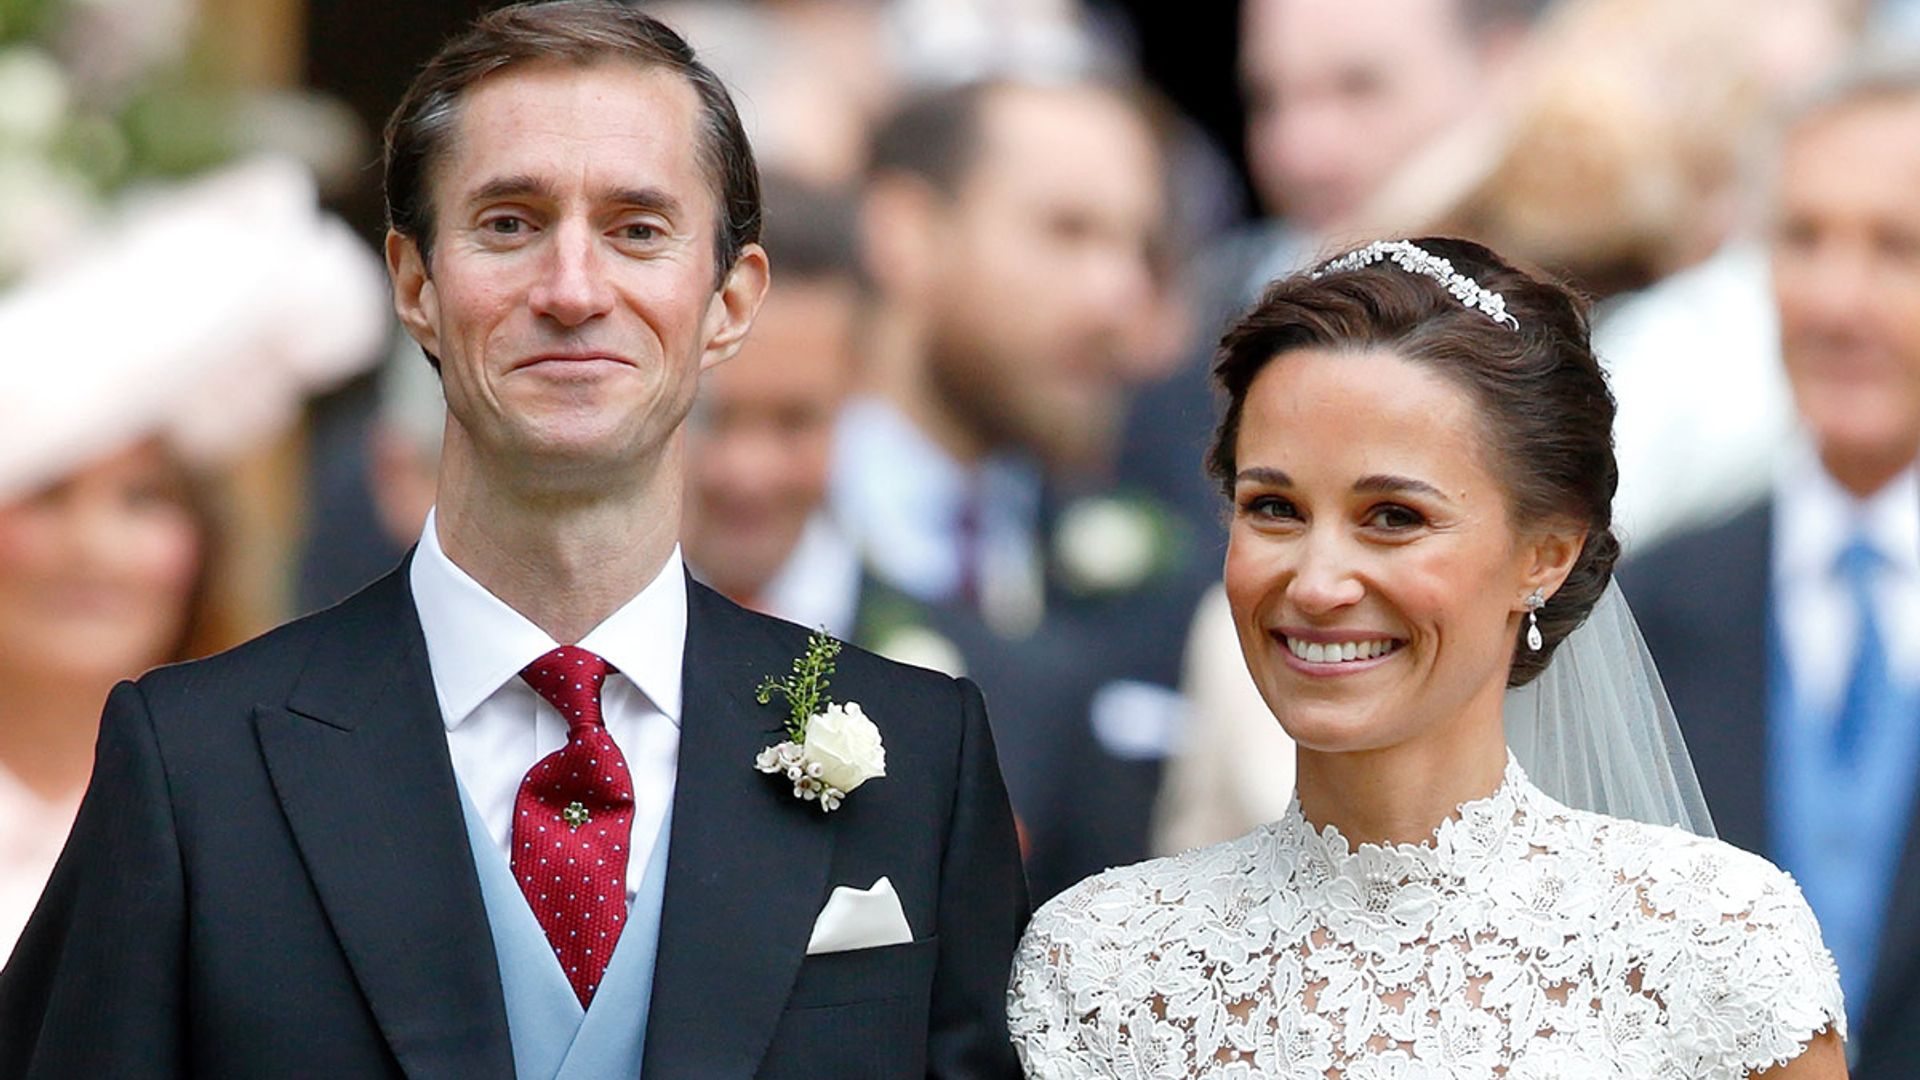 Pippa Middleton welcomes second child with husband James Matthews - find out name and gender